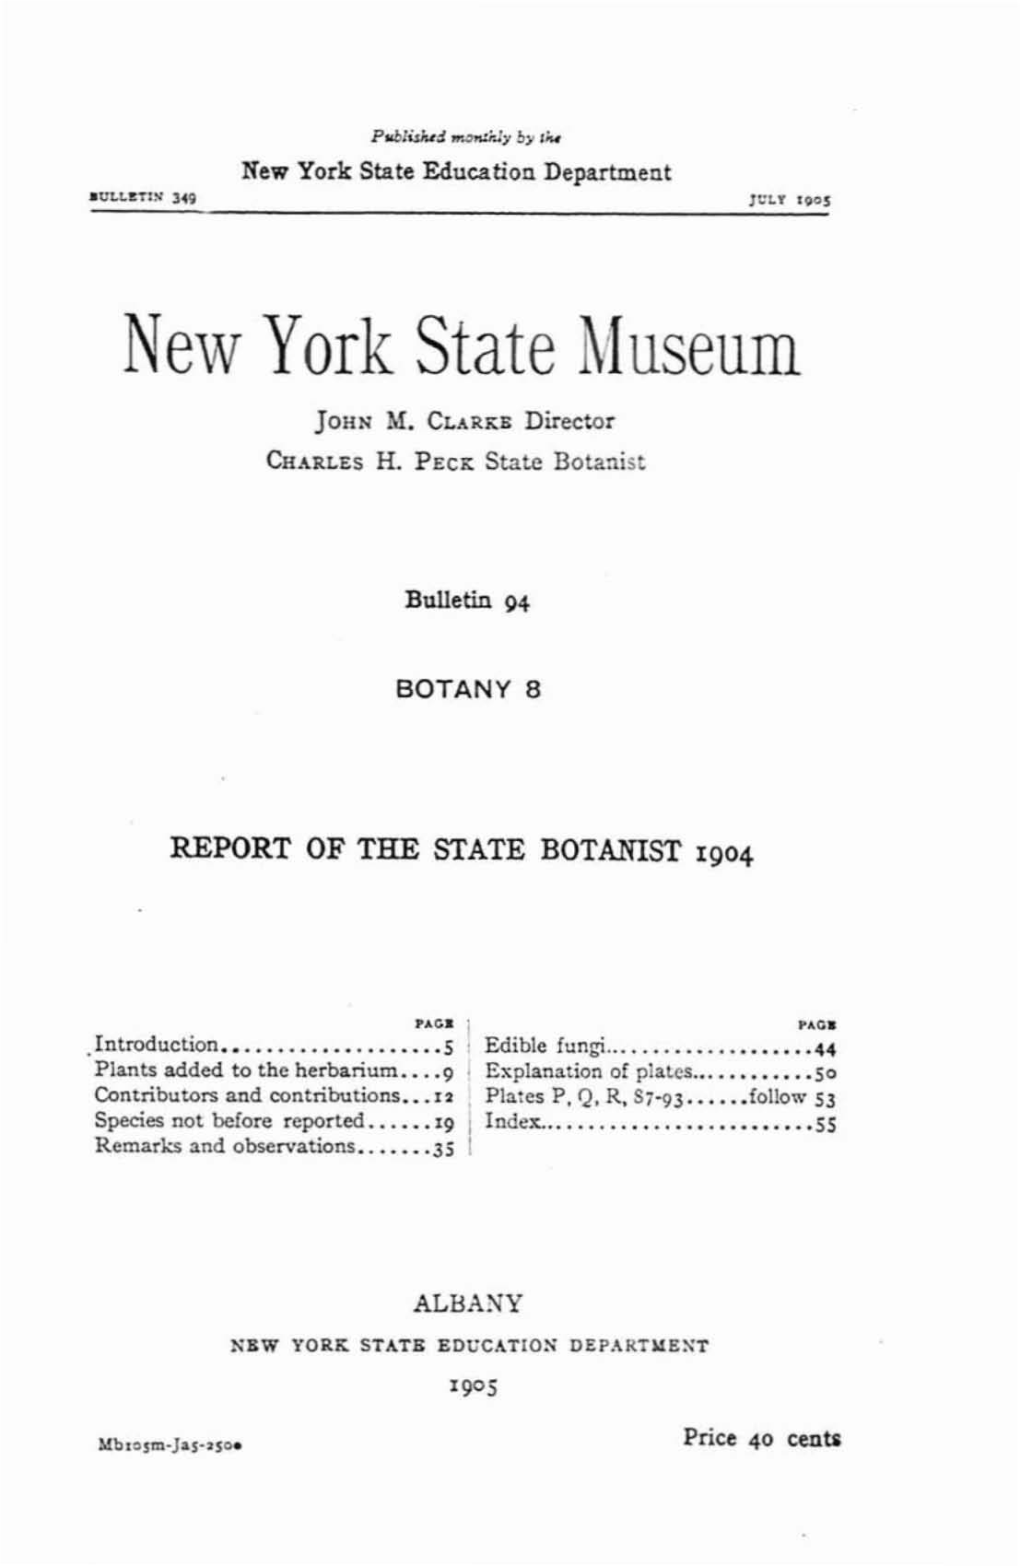 Report of the State Botanist 1904